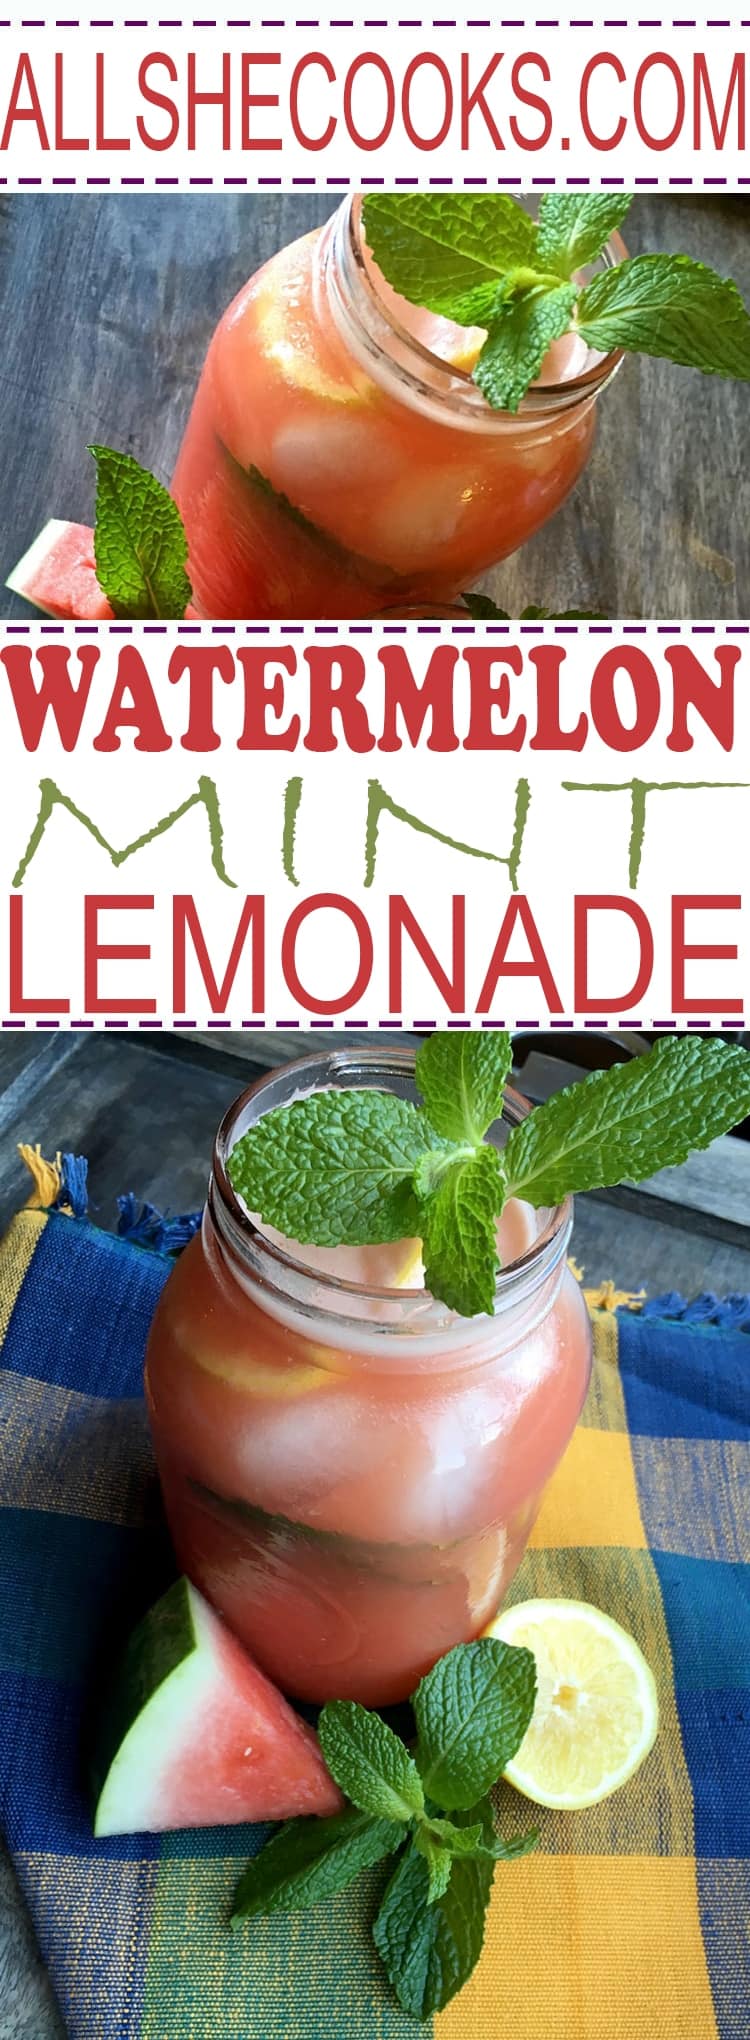 Watermelon Mint Lemonade recipe is a refreshing homemade lemonade drink that is perfect for summer sipping.